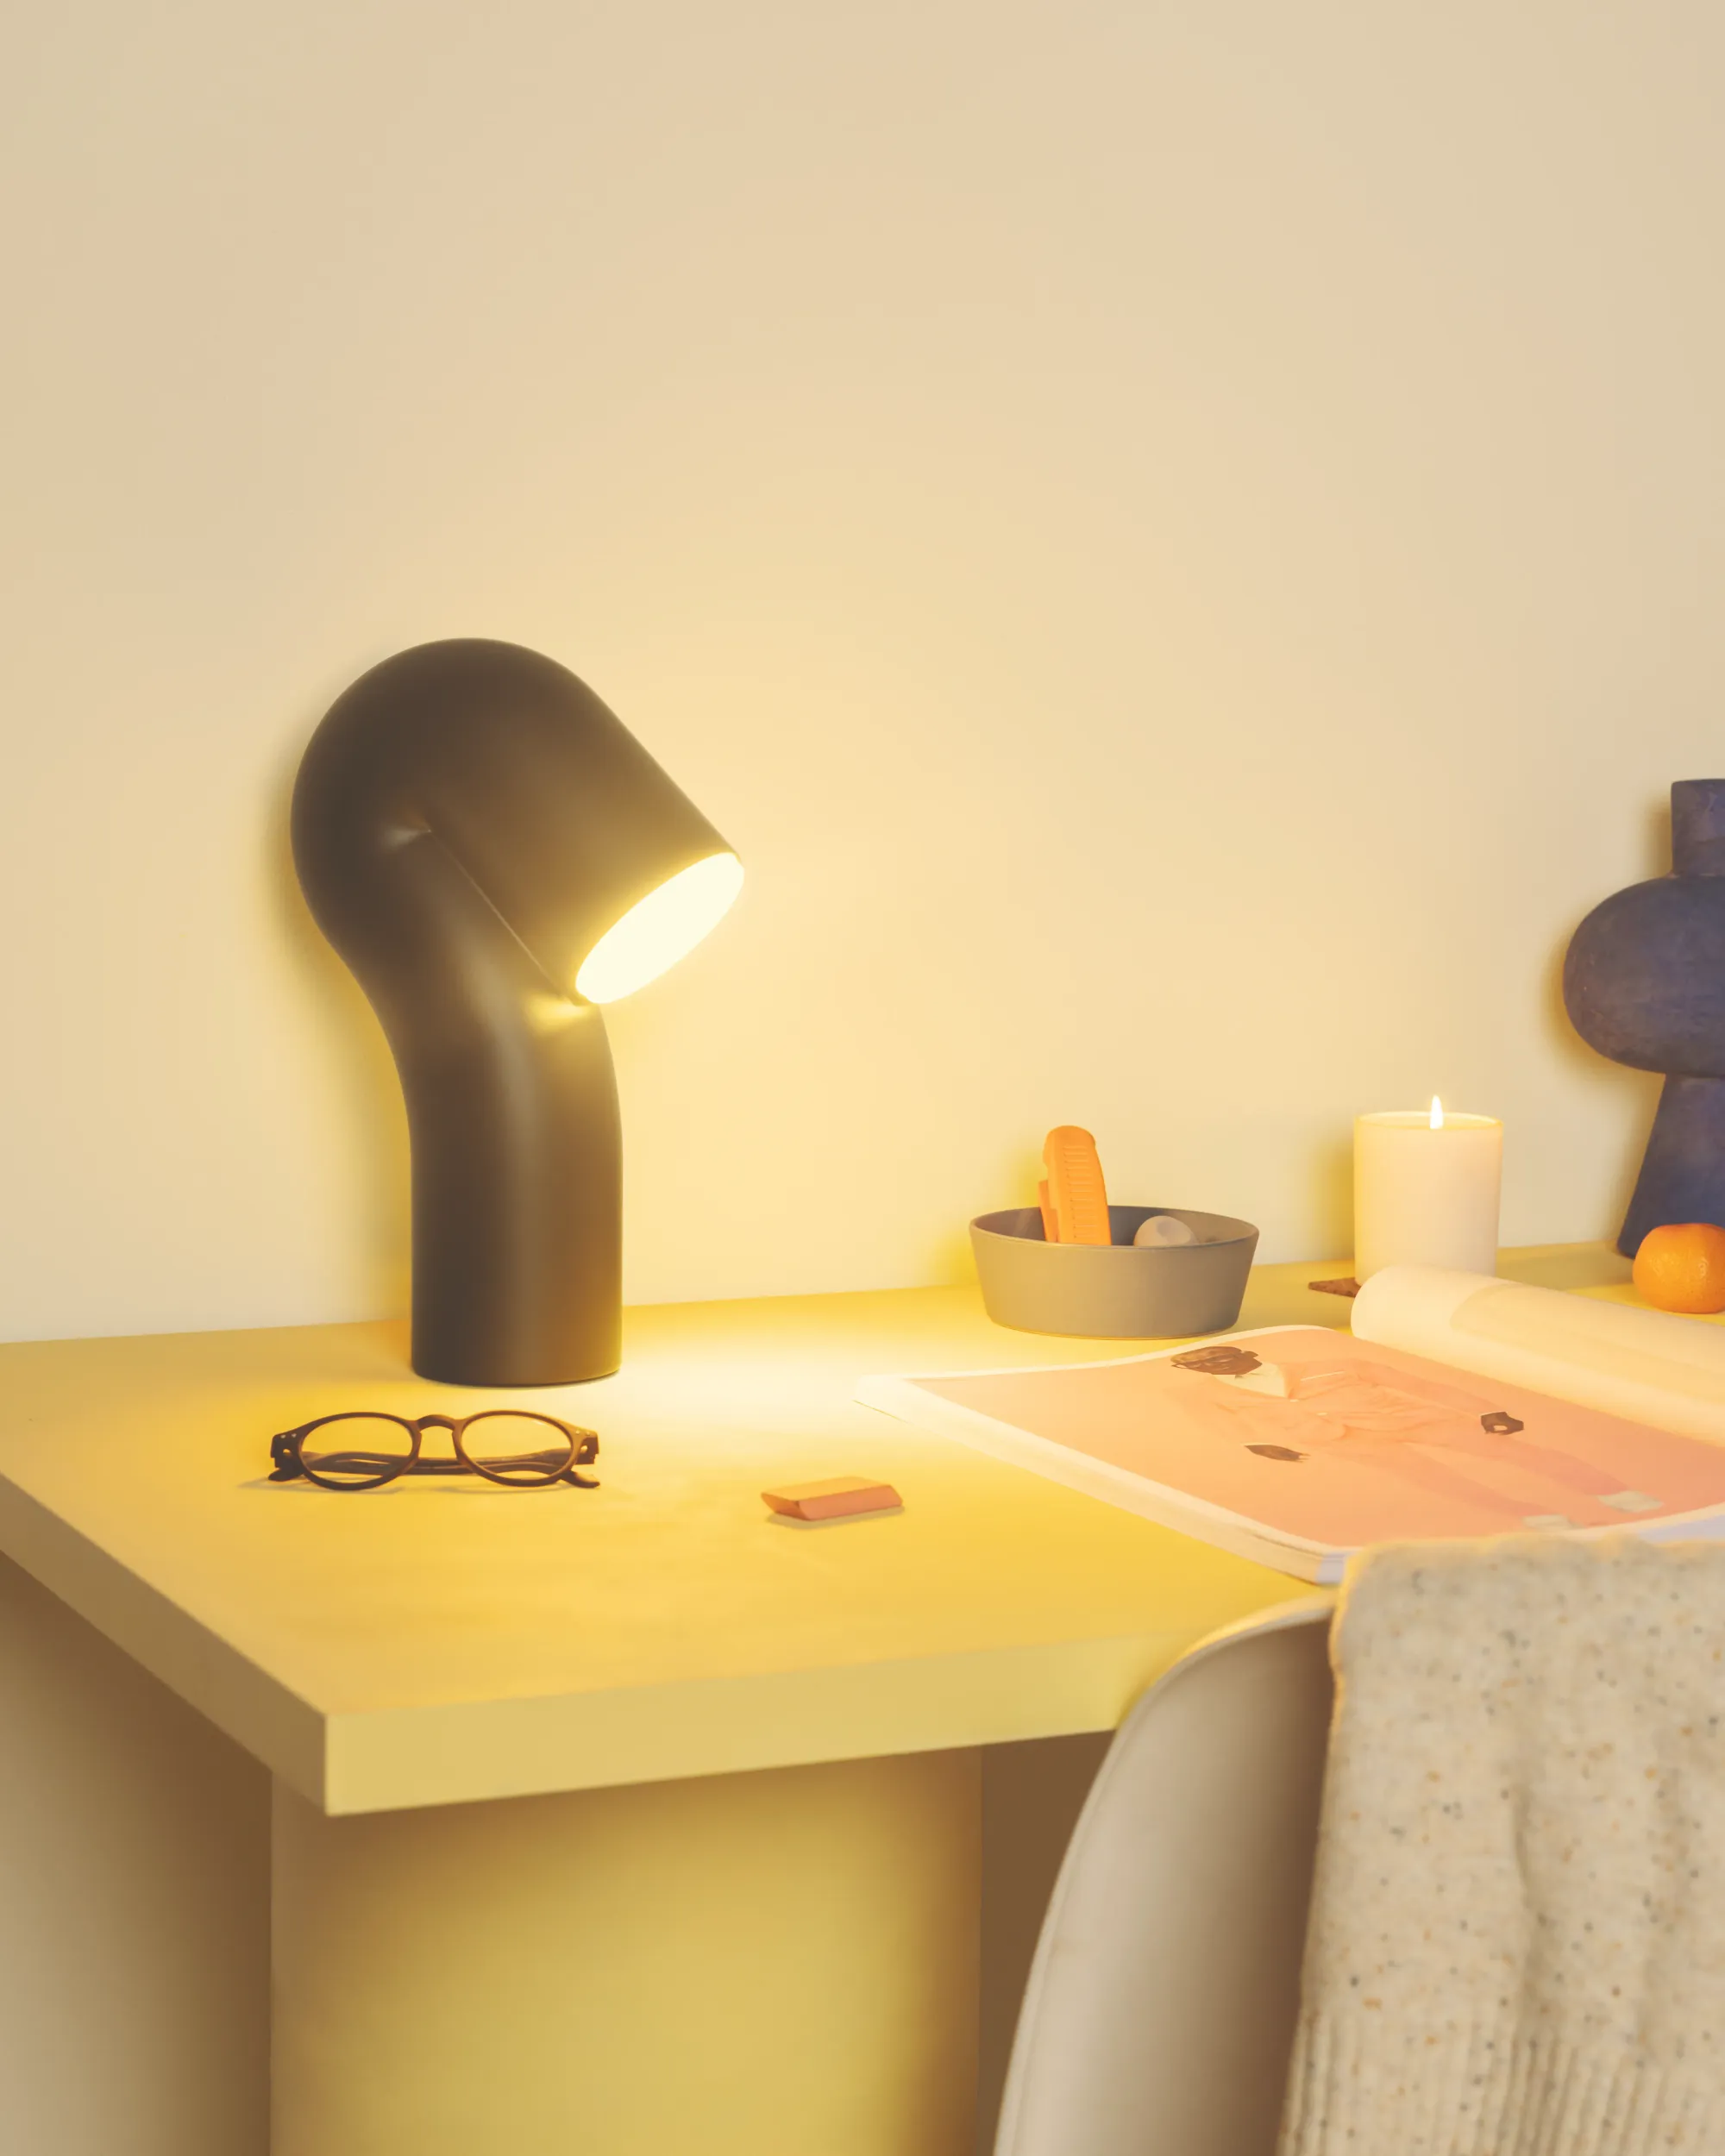 A Smoothy Table Light from Gantri lights up a home office table filled with a pair of glasses and some decorative knick-knacks